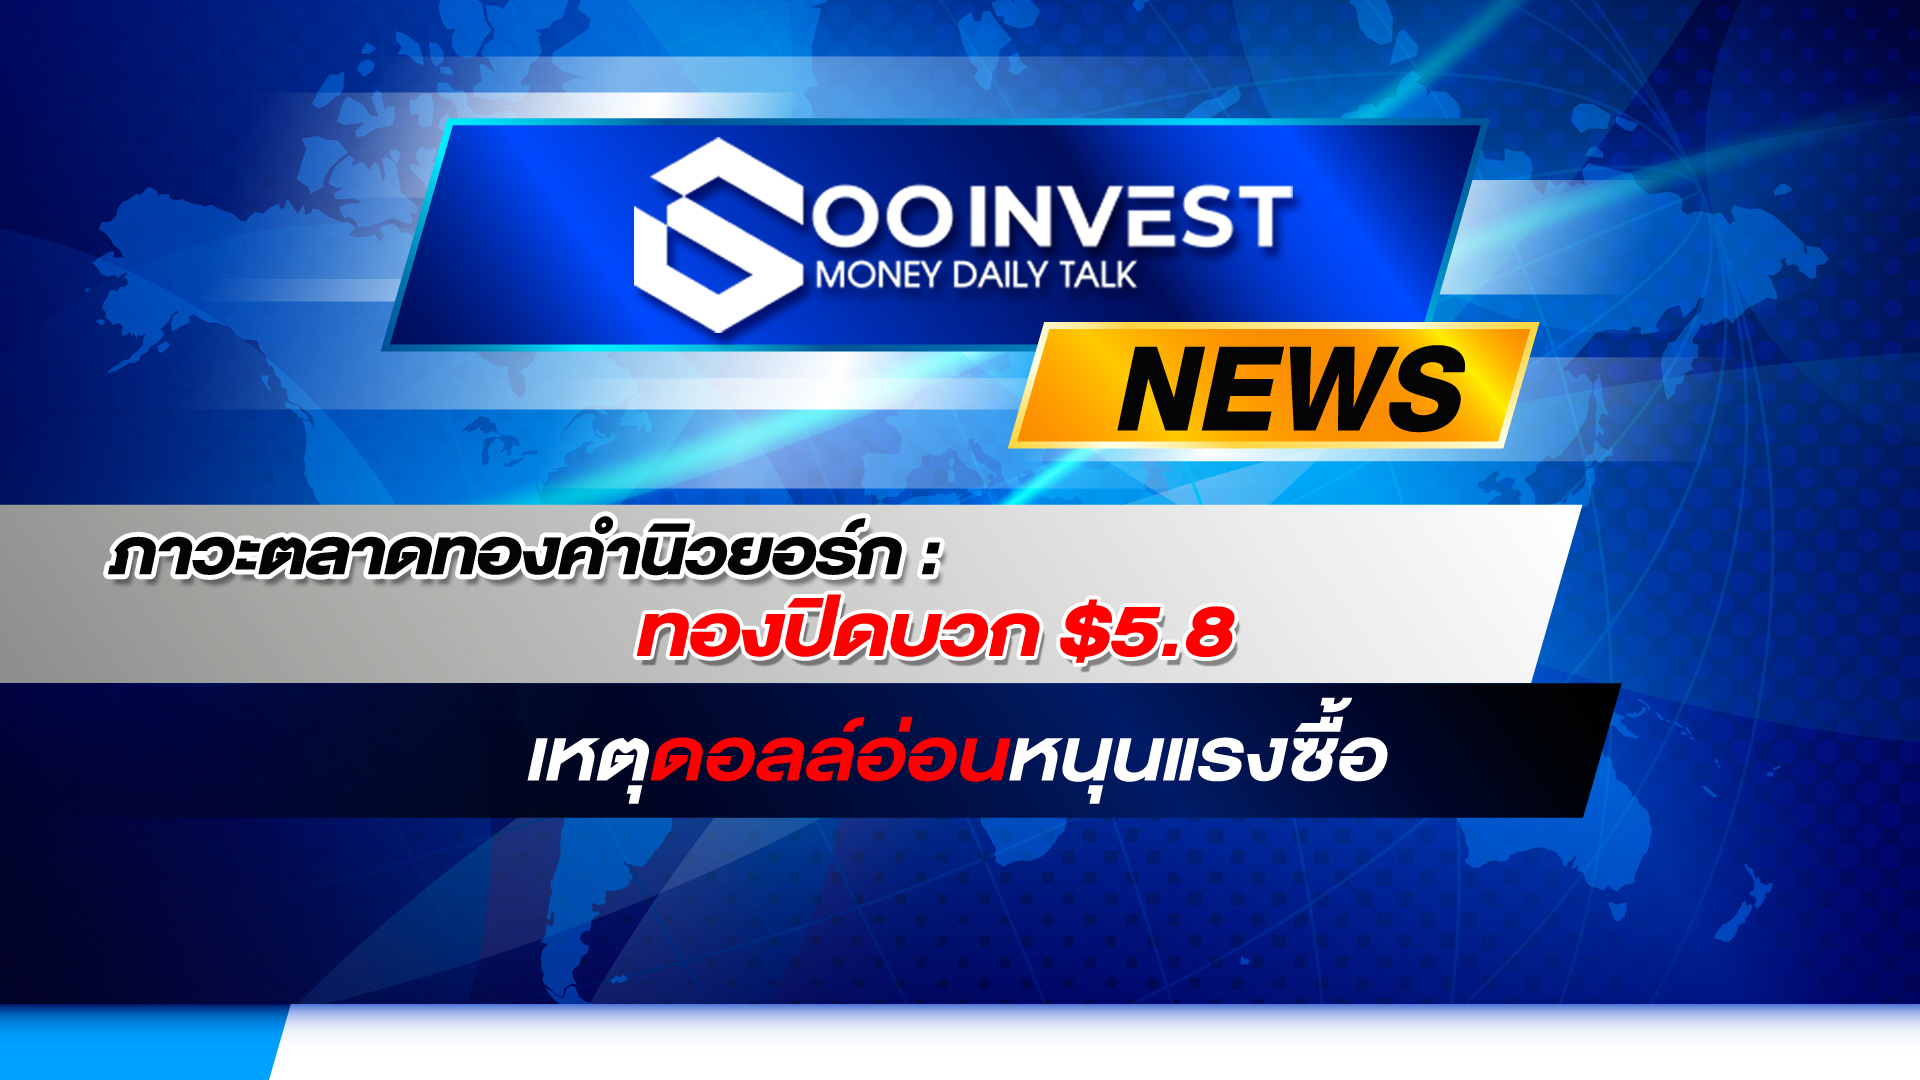 goo invest new 17 may 22